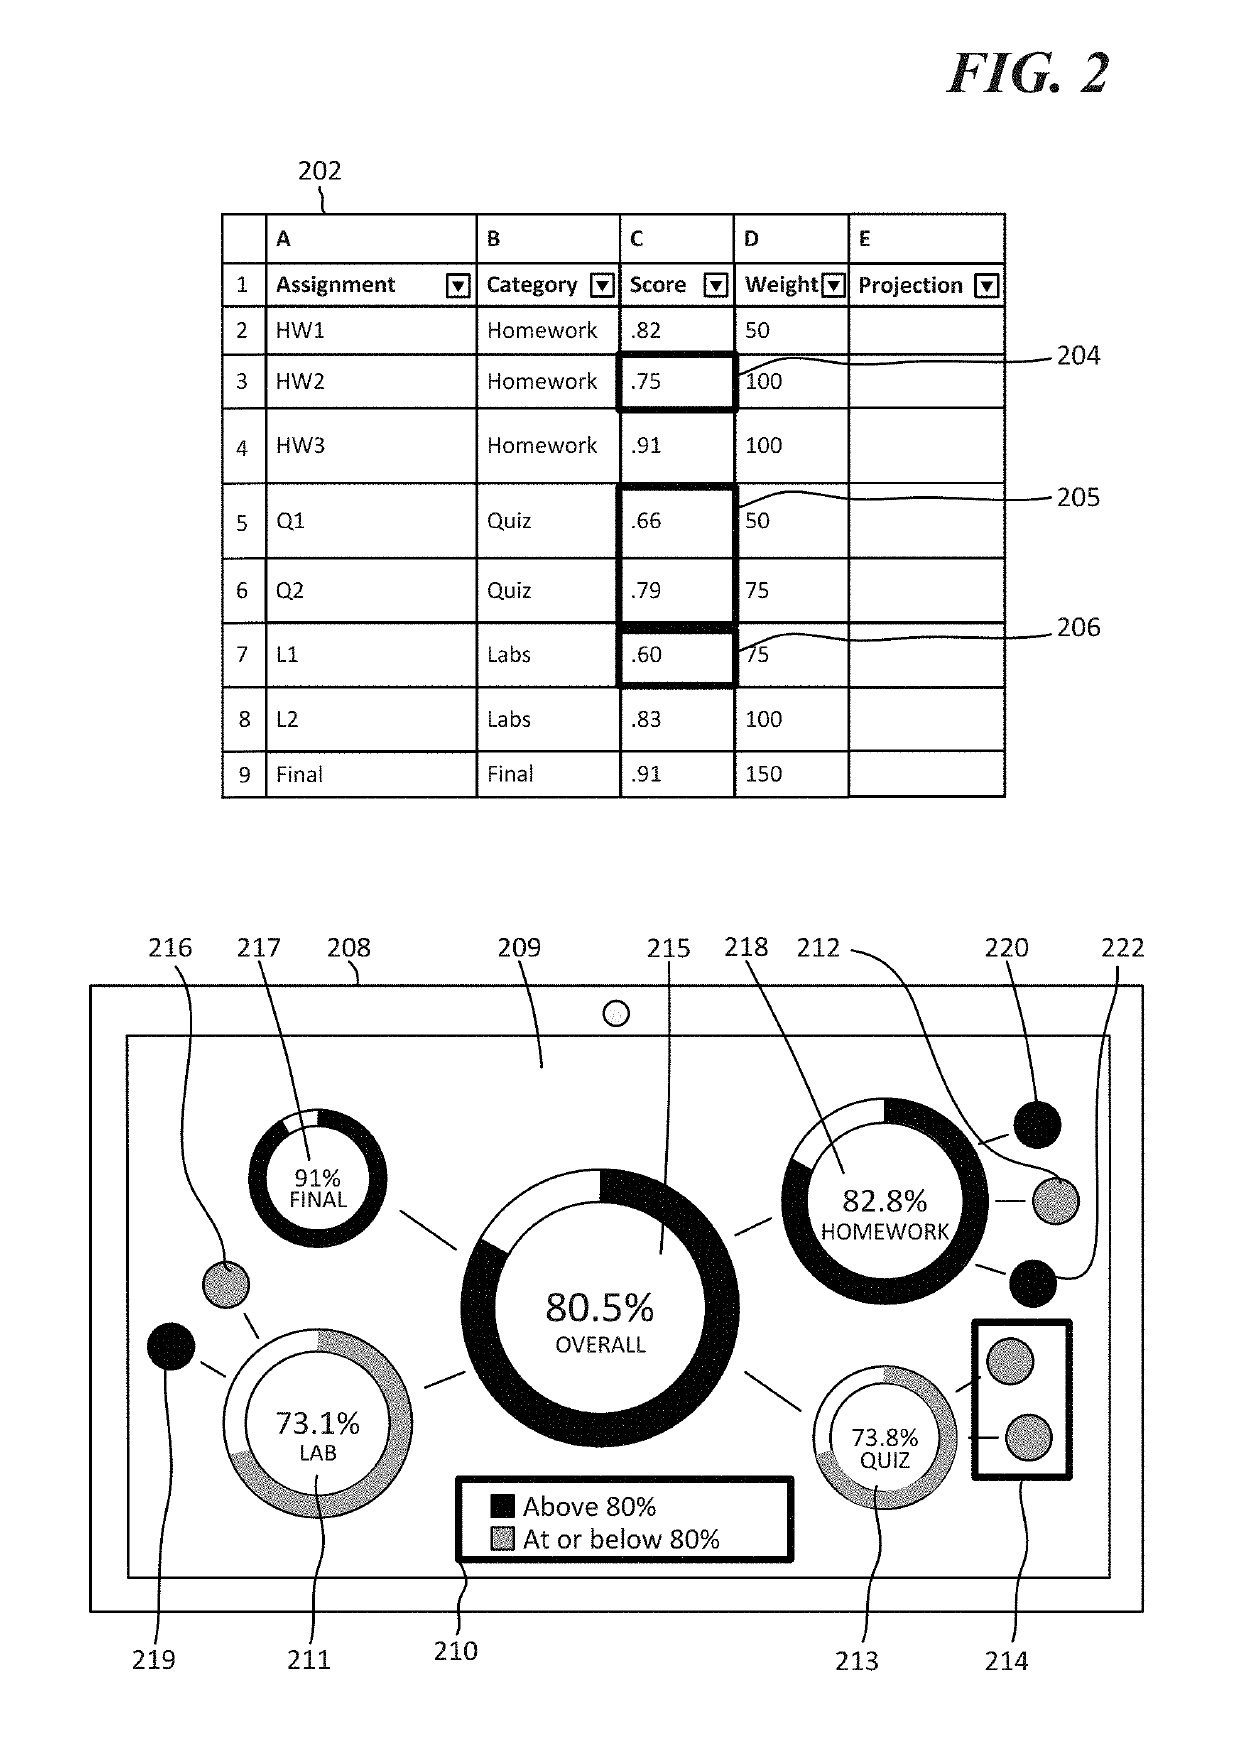 Aggregation and processing of hierarchical data for display of interactive user interface chart elements